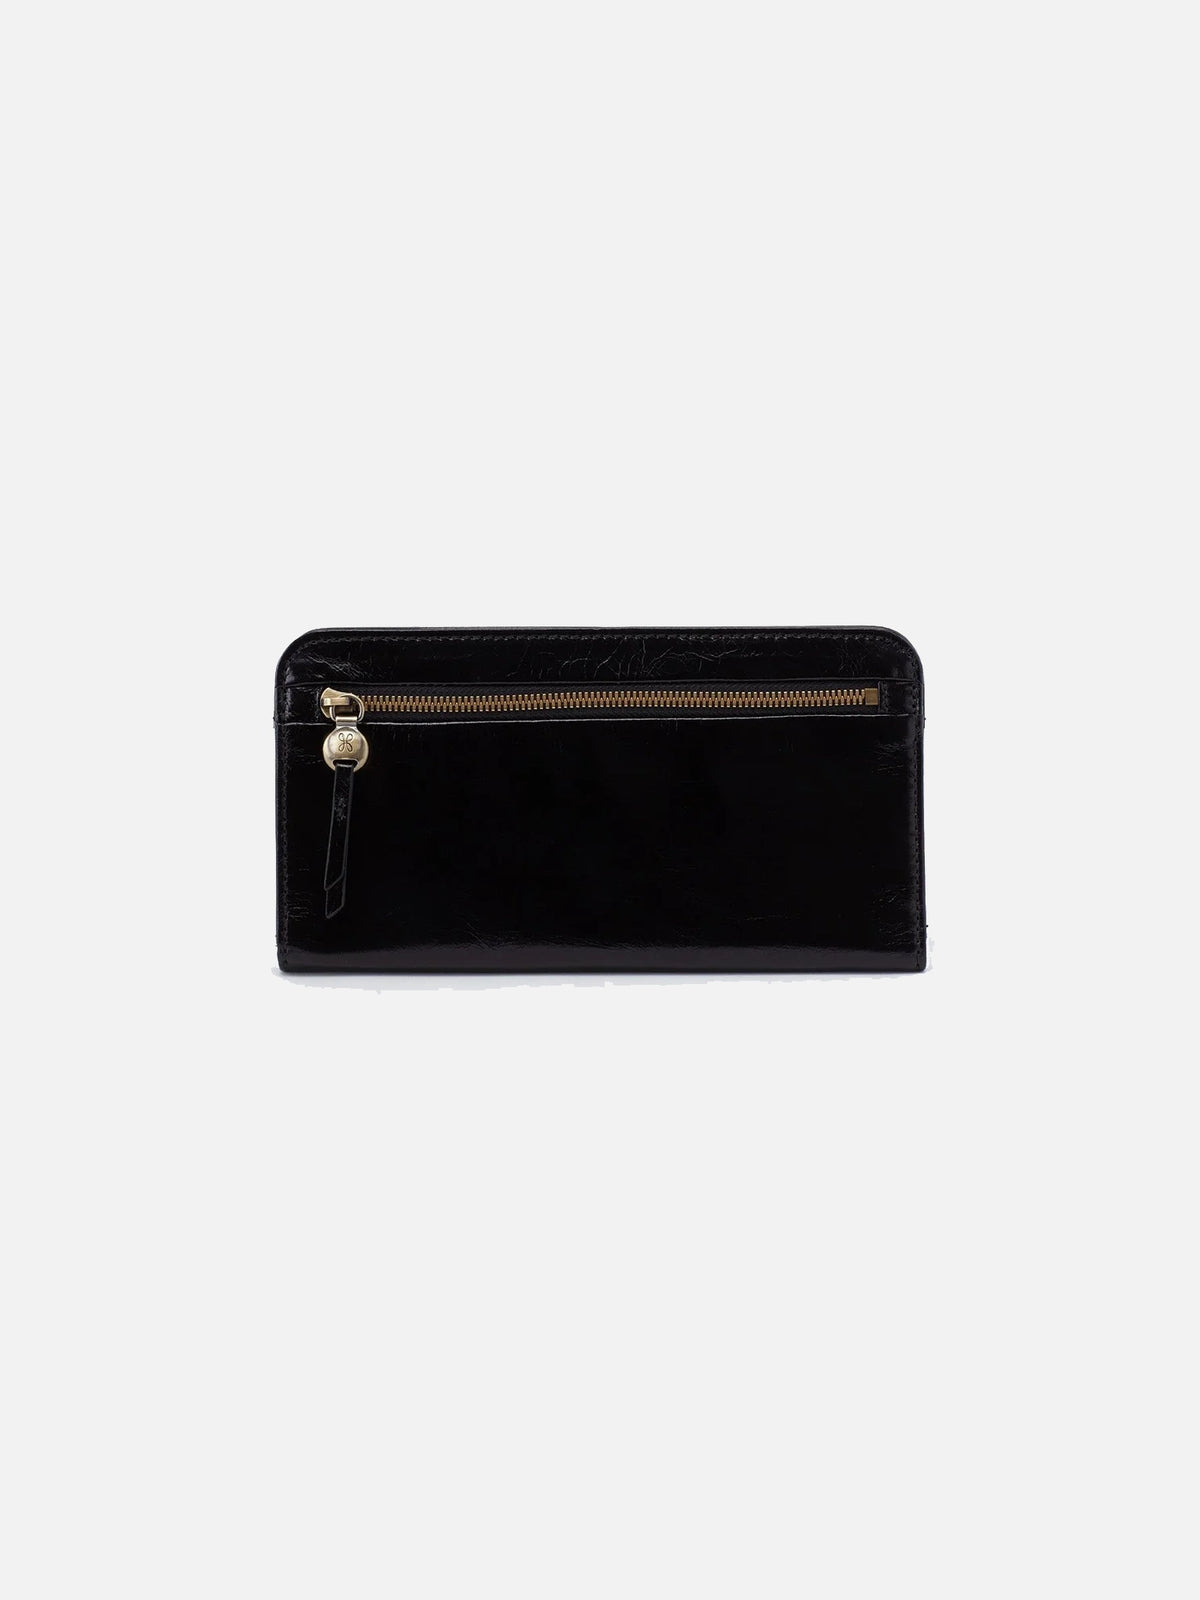 hobo angle continental wallet in black polished leather